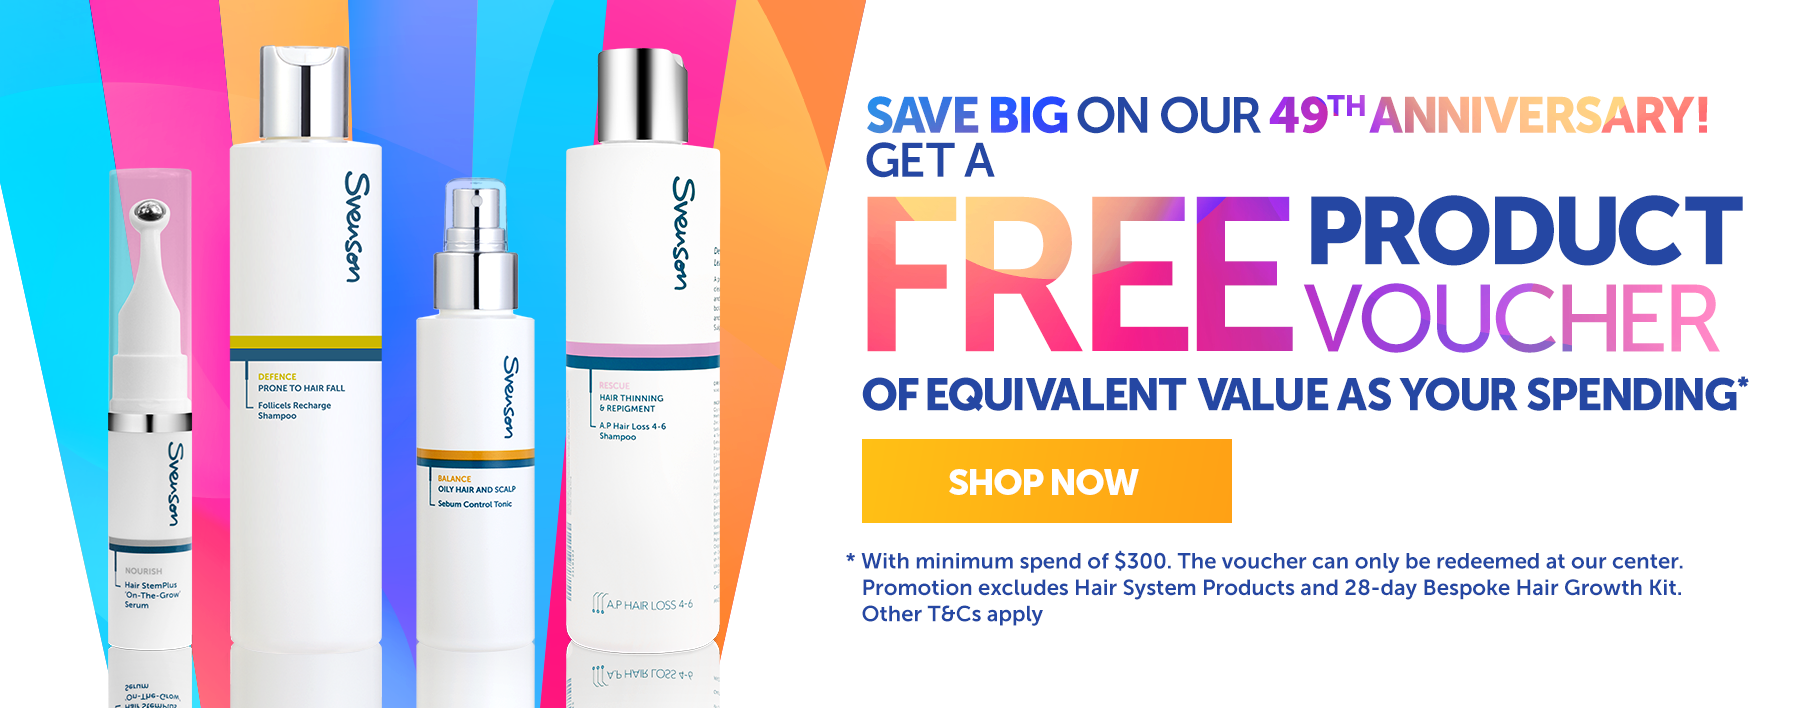 Get product voucher of equivalent value as spending Svenson